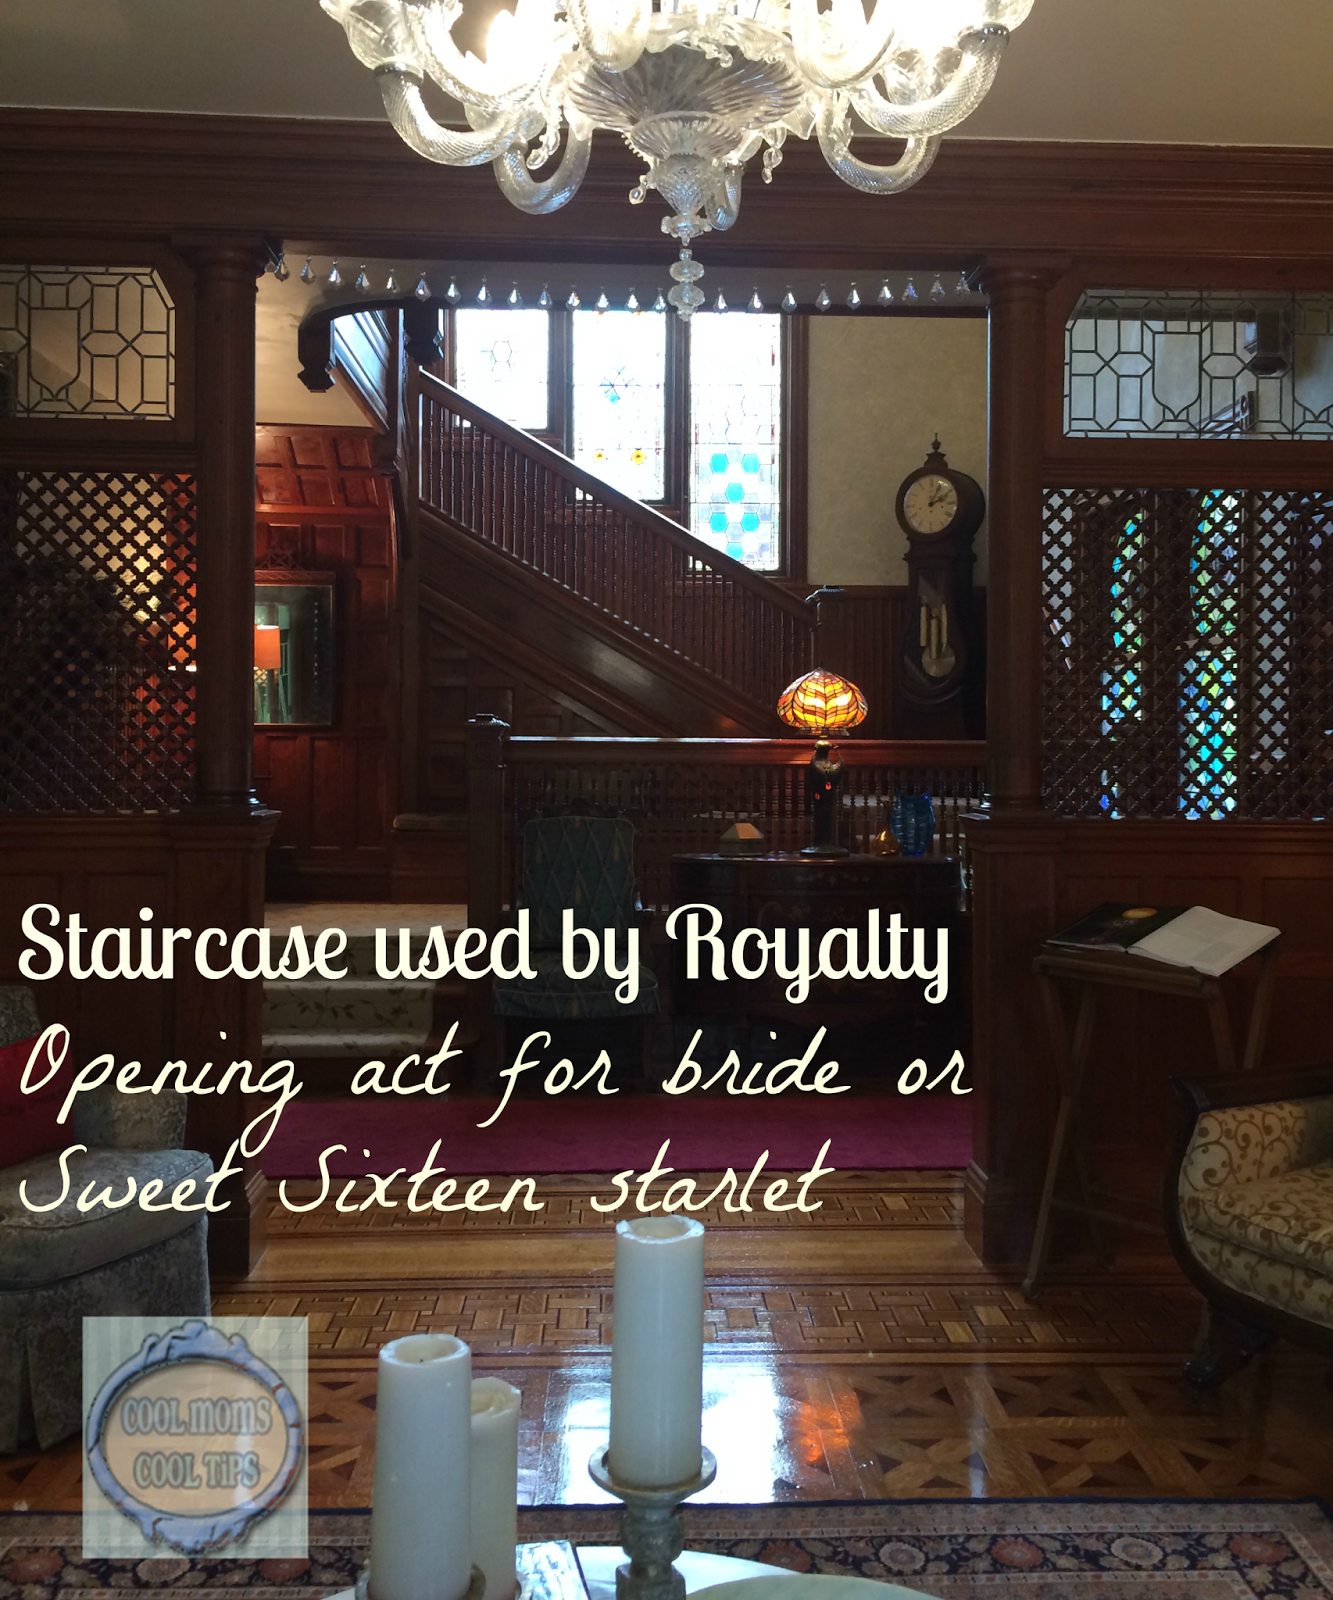 cool moms cool tips Stetson Mansion staircase